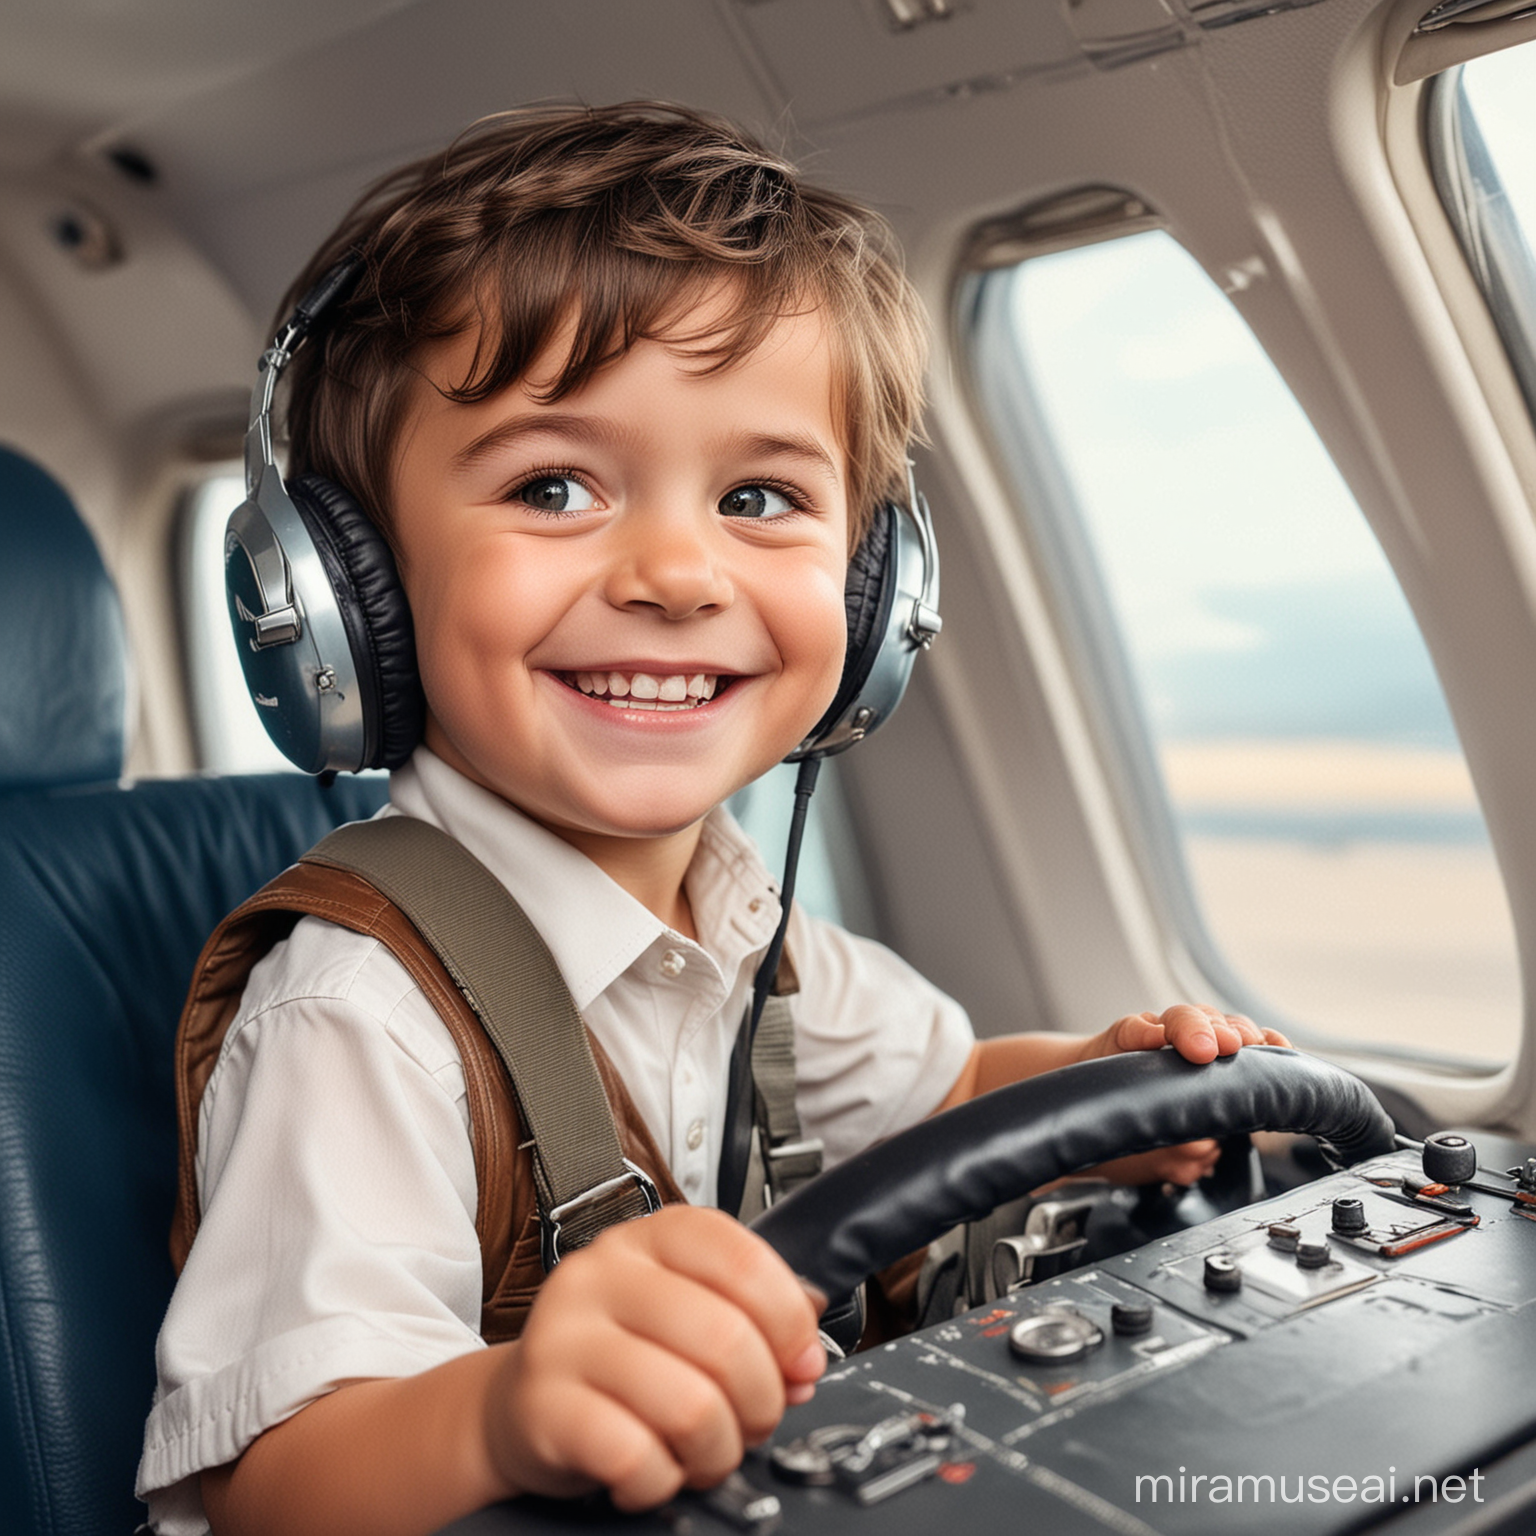 happy little kid driving yhe plane as if he was the pilot on a plane
